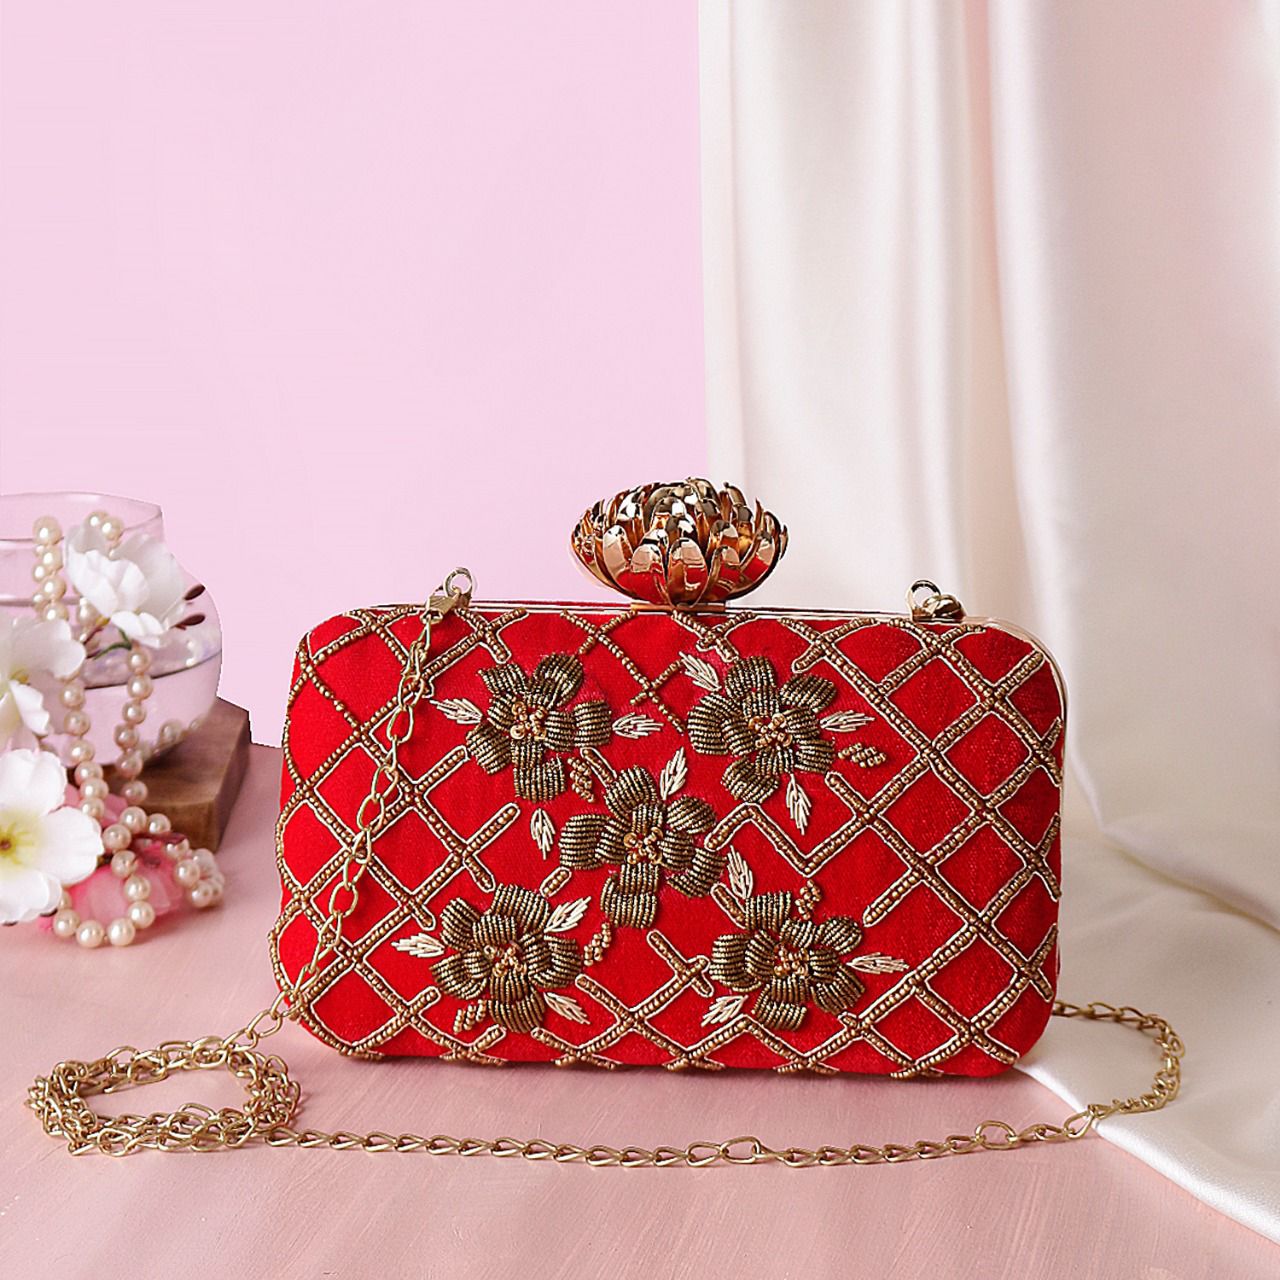 Red beauty embroidered clutch